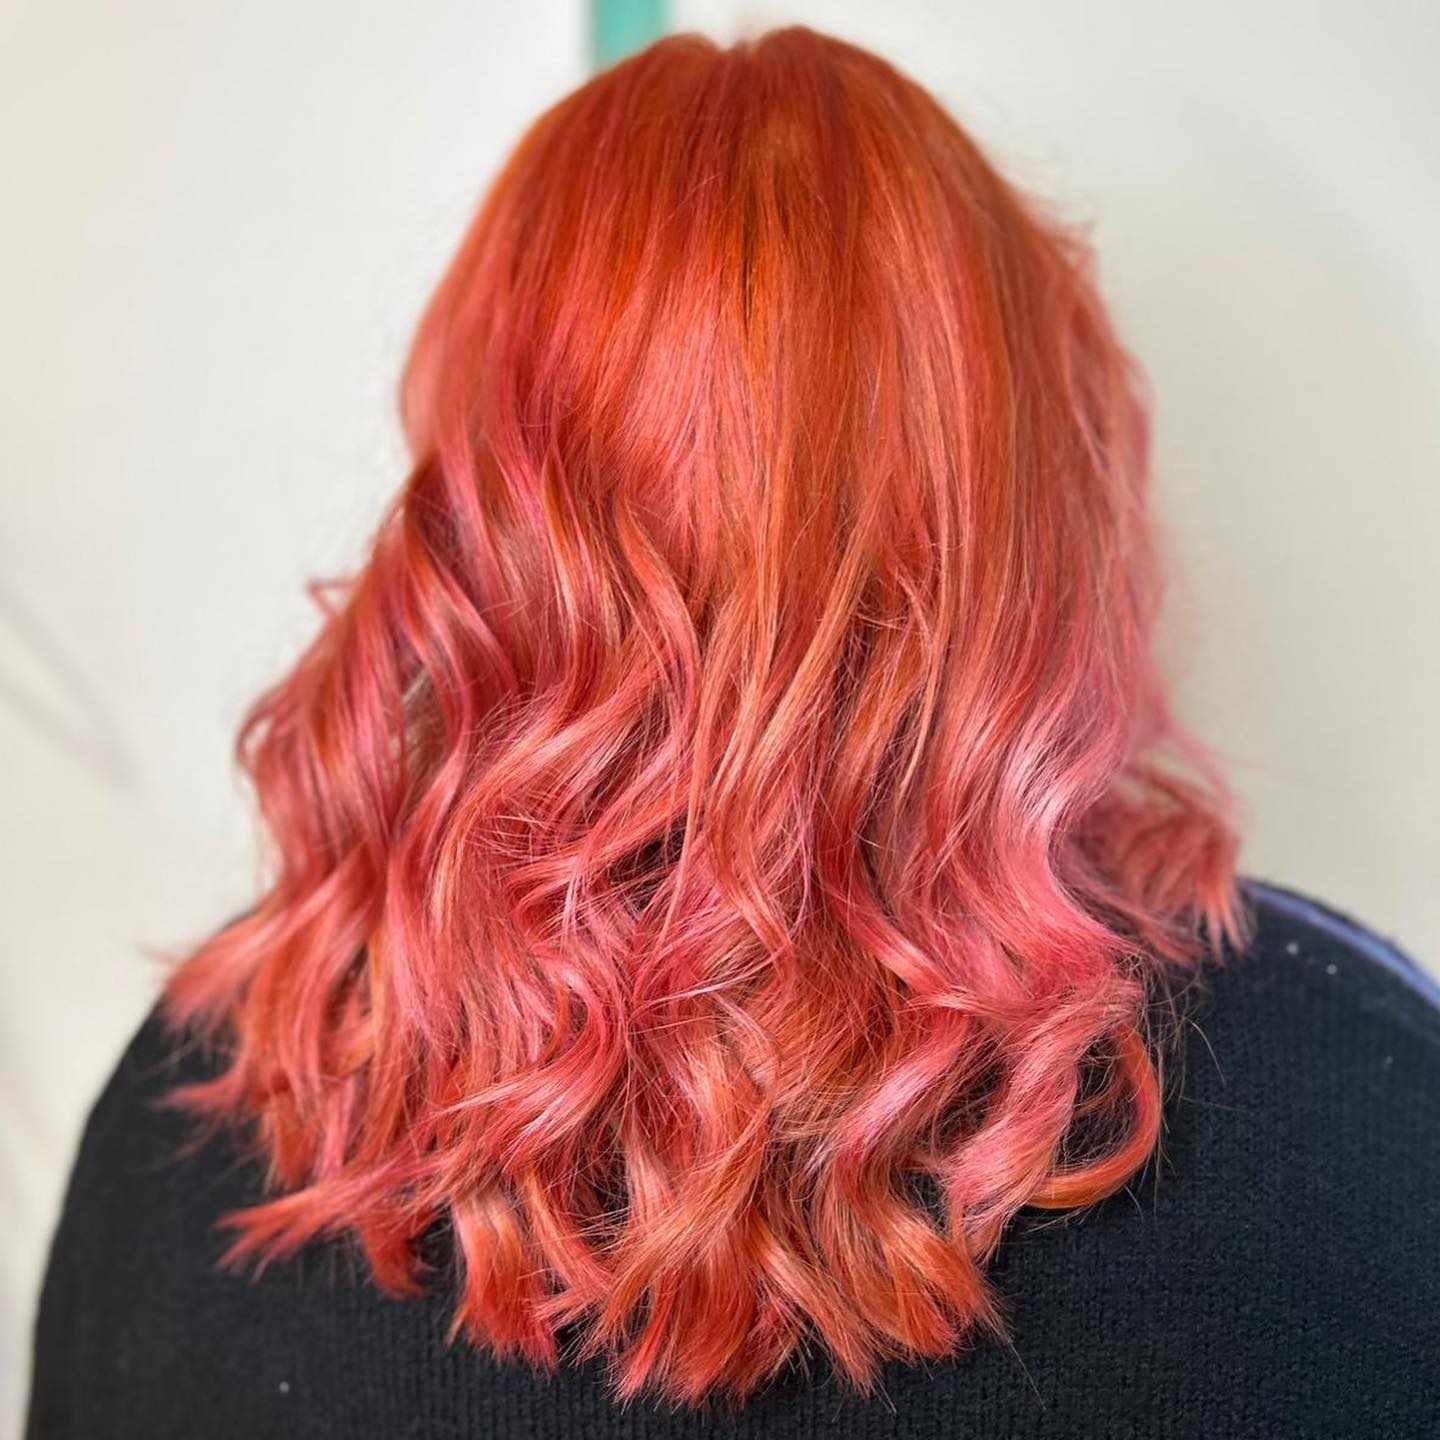 pink ombre hair color 142 Ombre pink hair blonde | Pastel pink ombre hair | Pink balayage Hair Pink Ombre Hair Color for Women